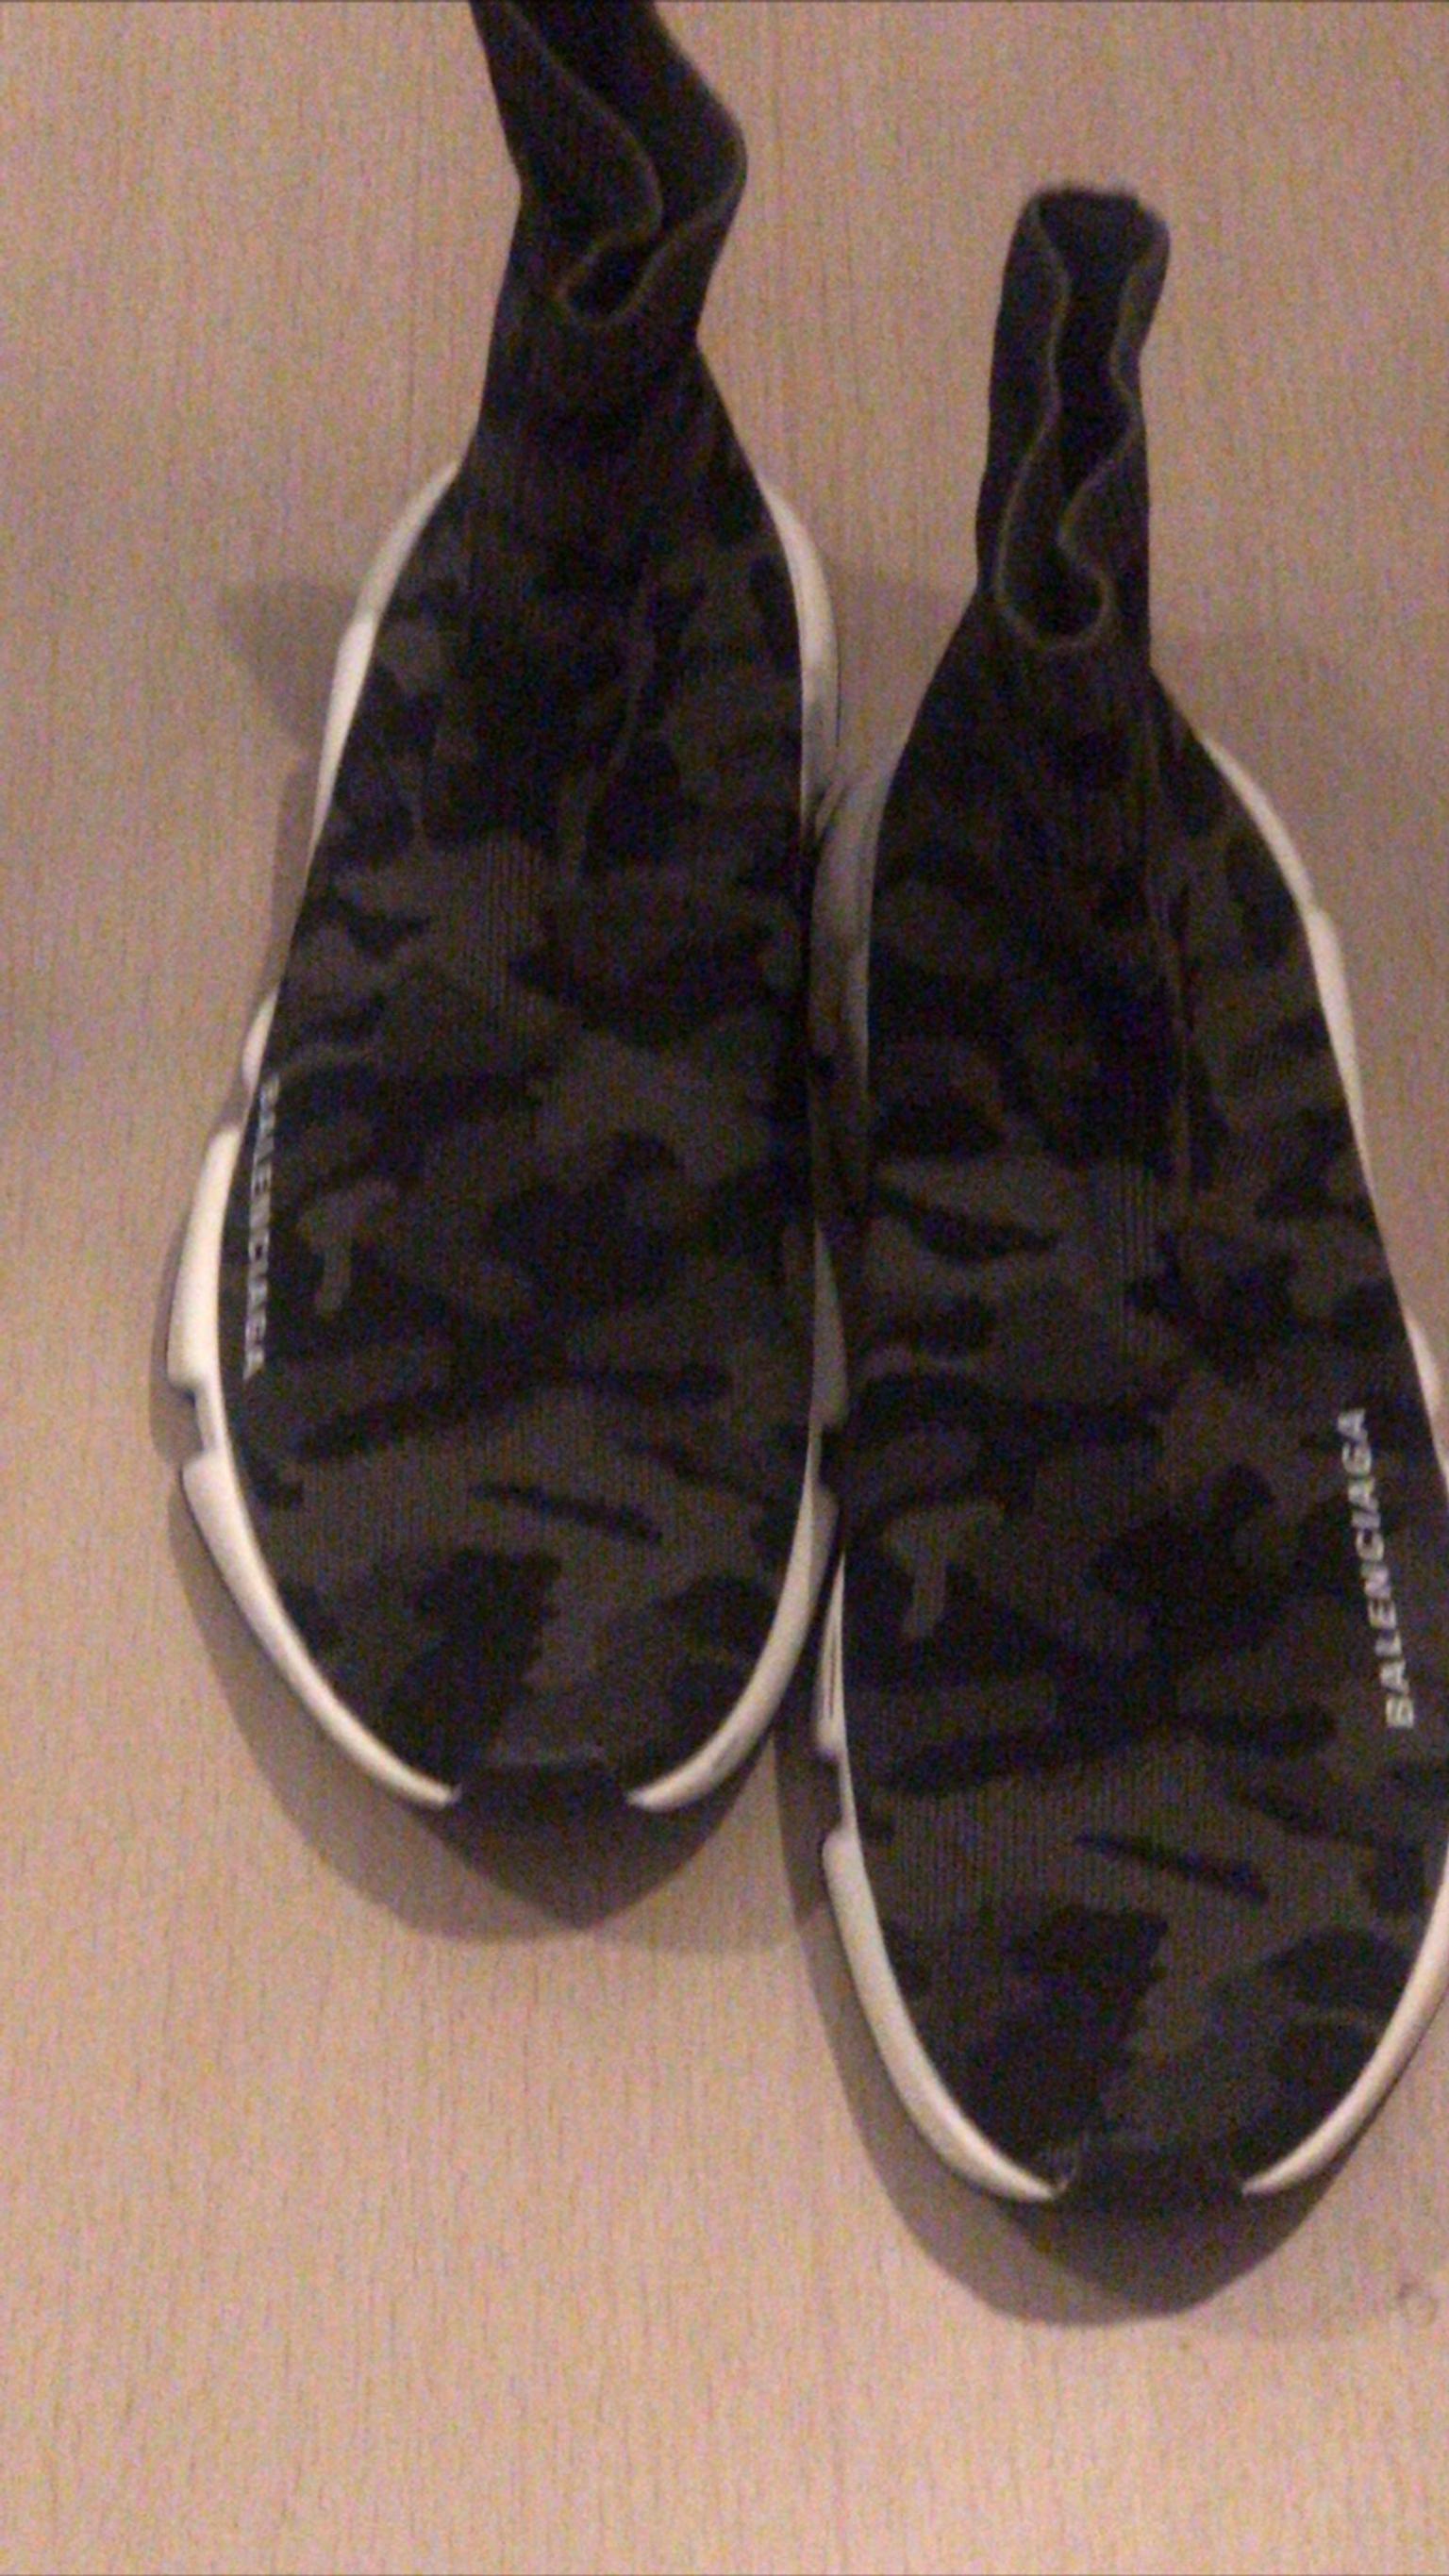 Camouflage balenciaga shoes in N21 